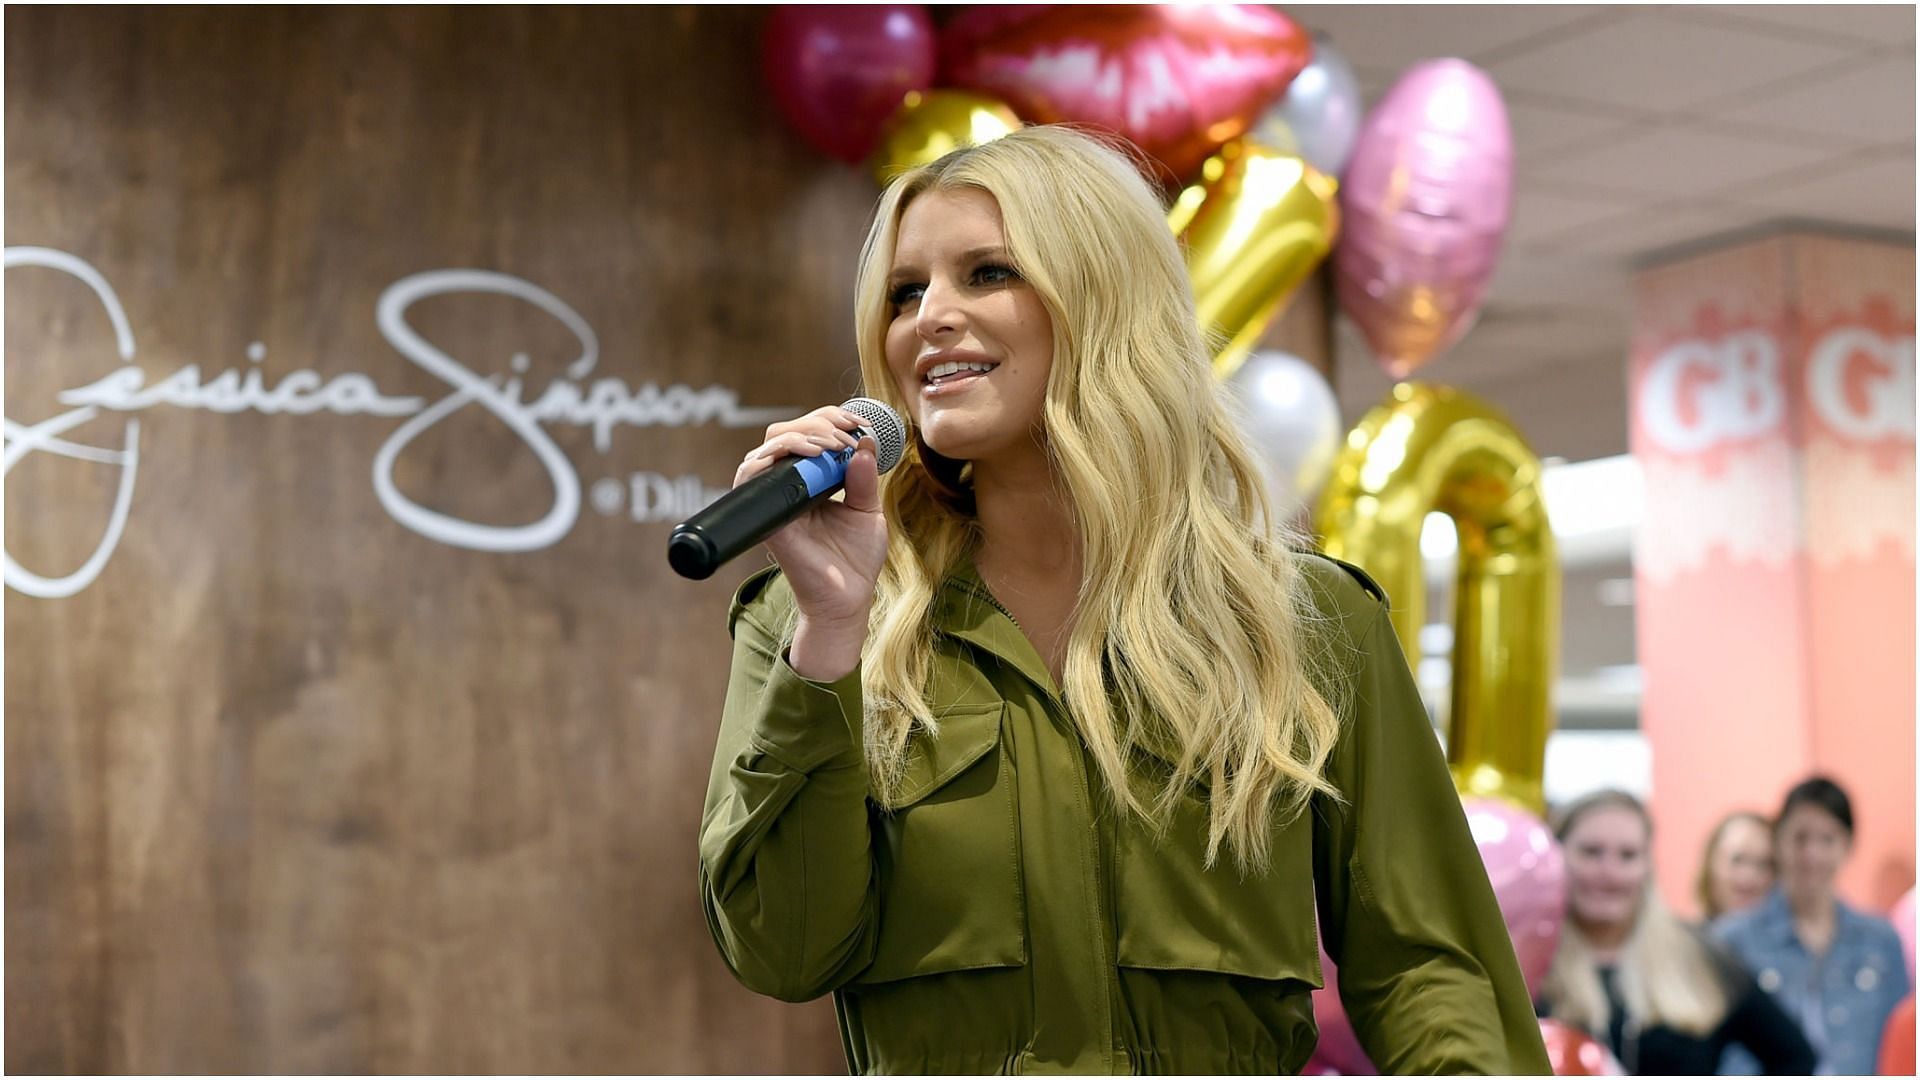 Jessica Simpson celebrates #1 New York Times best-selling memoir, &quot;Open Book&quot; at Dillard&#039;s CoolSprings (Image by John Shearer via Getty Images)